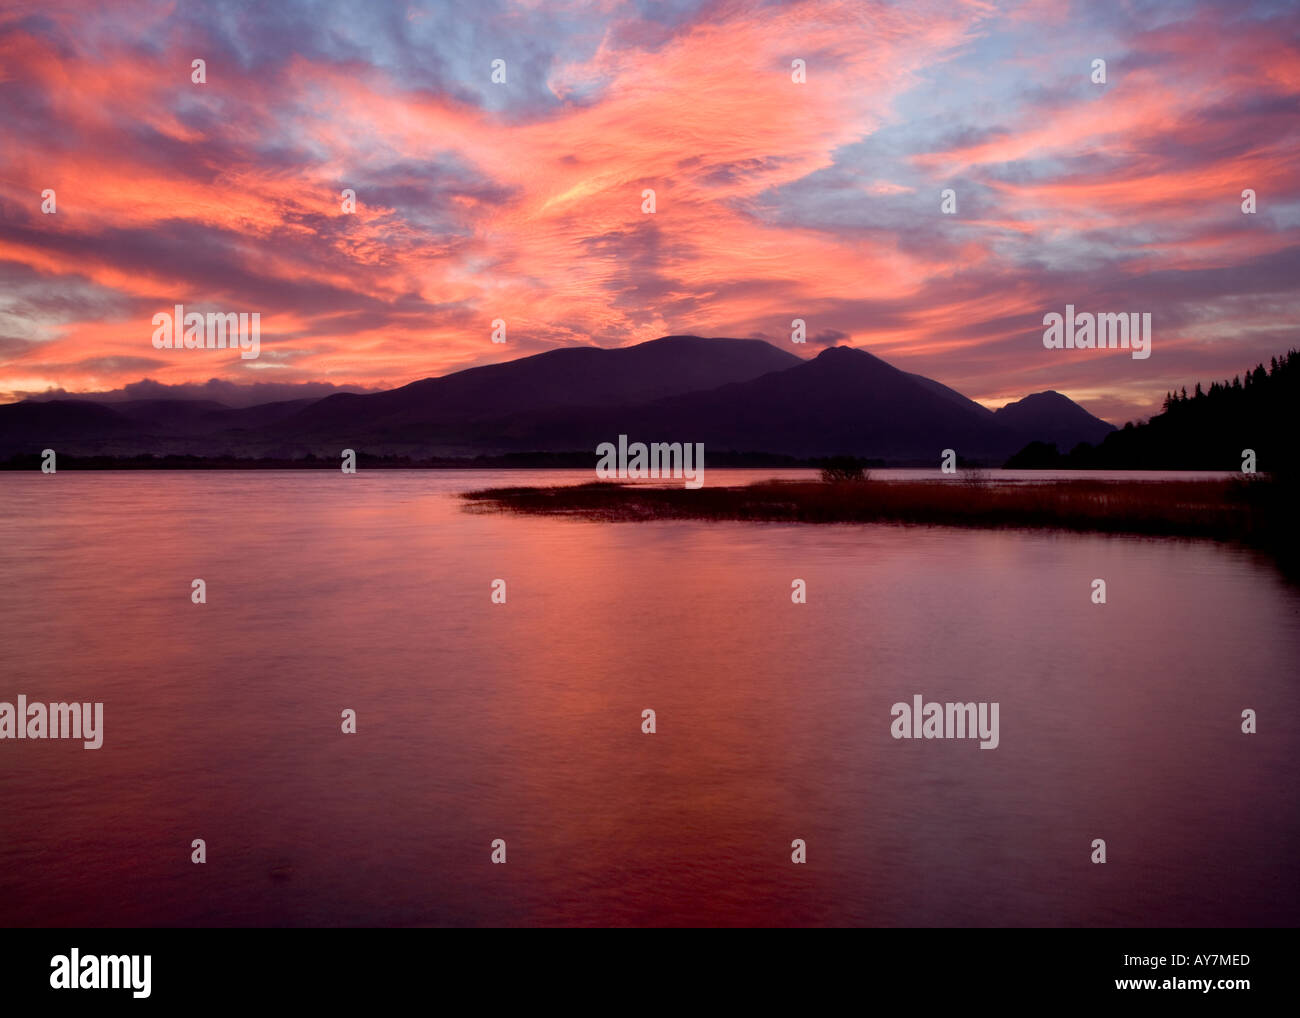 Sunrise over Bassenthwaite, Lake District, Cumbria with Skiddaw, Ullock Pike and Dodd silhouetted in the background. Stock Photo